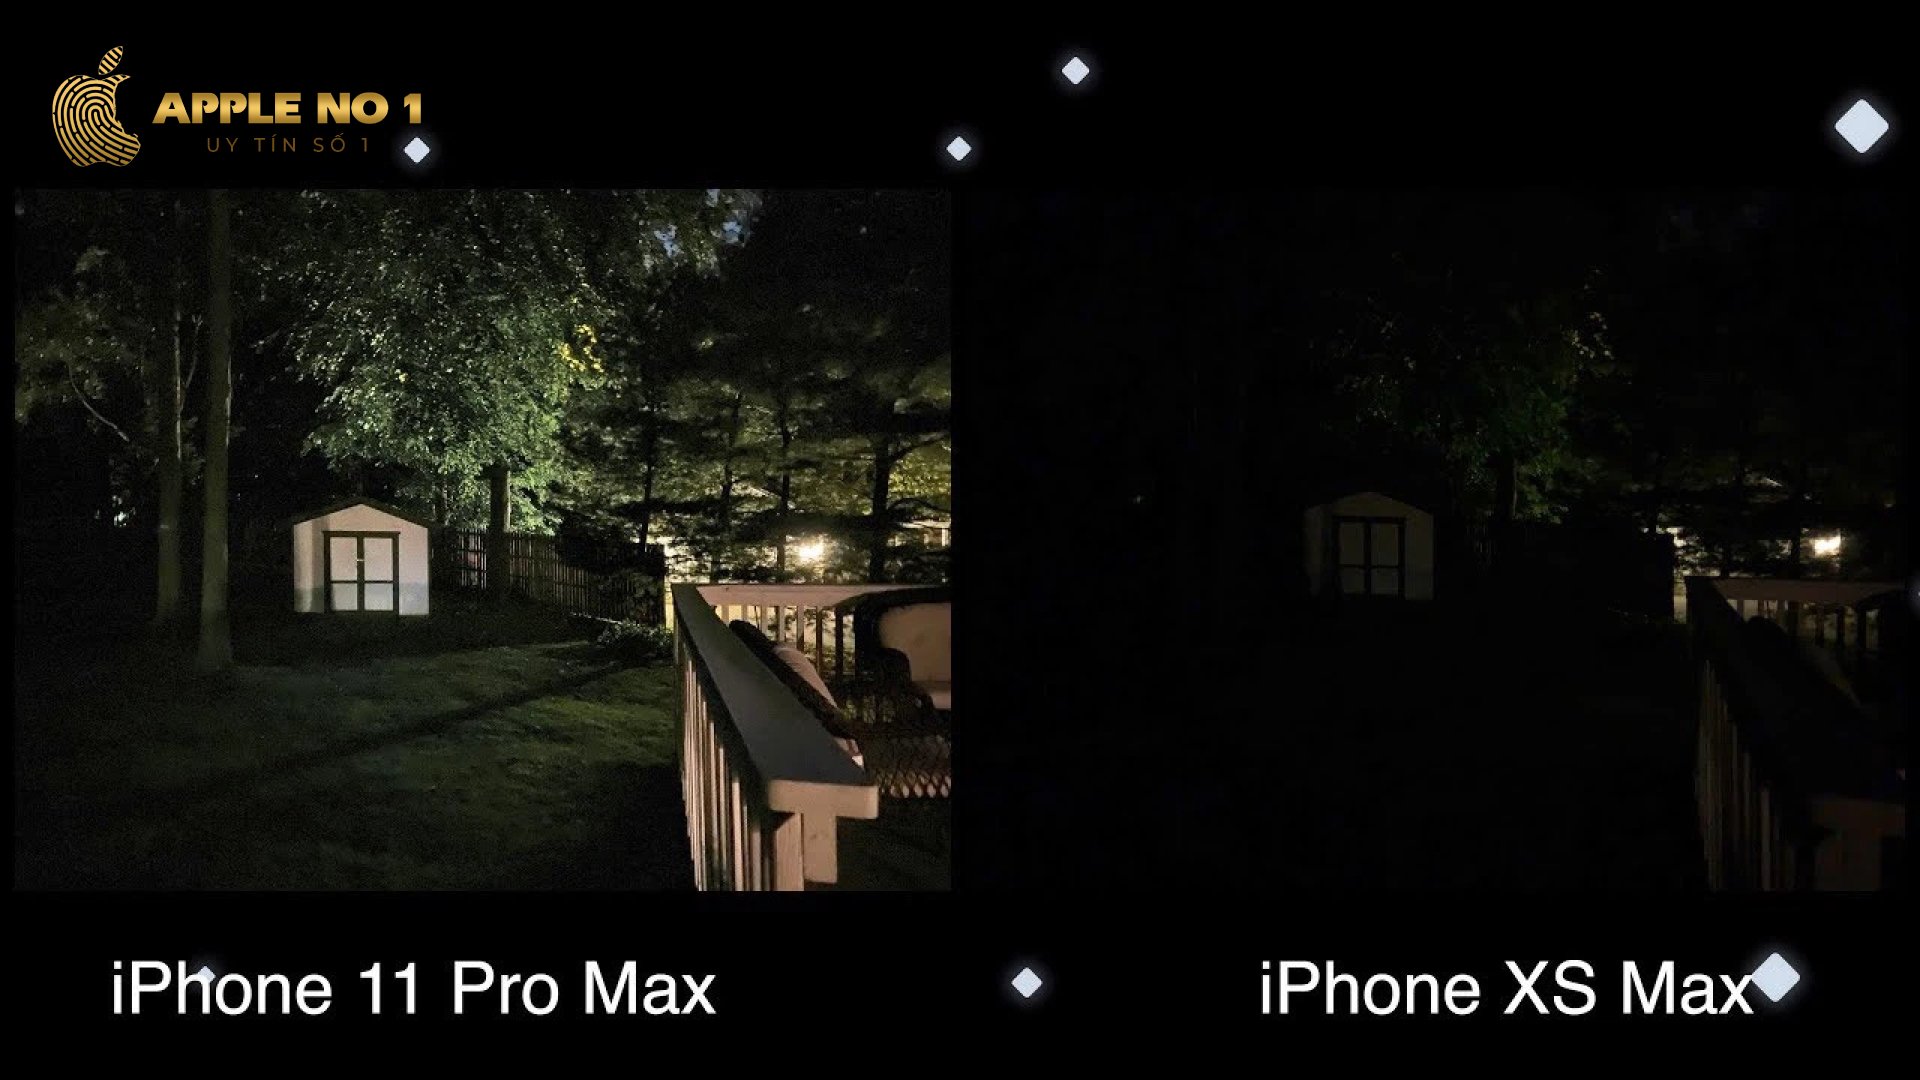 che do chup anh dem night mode | iphone 11 pro max